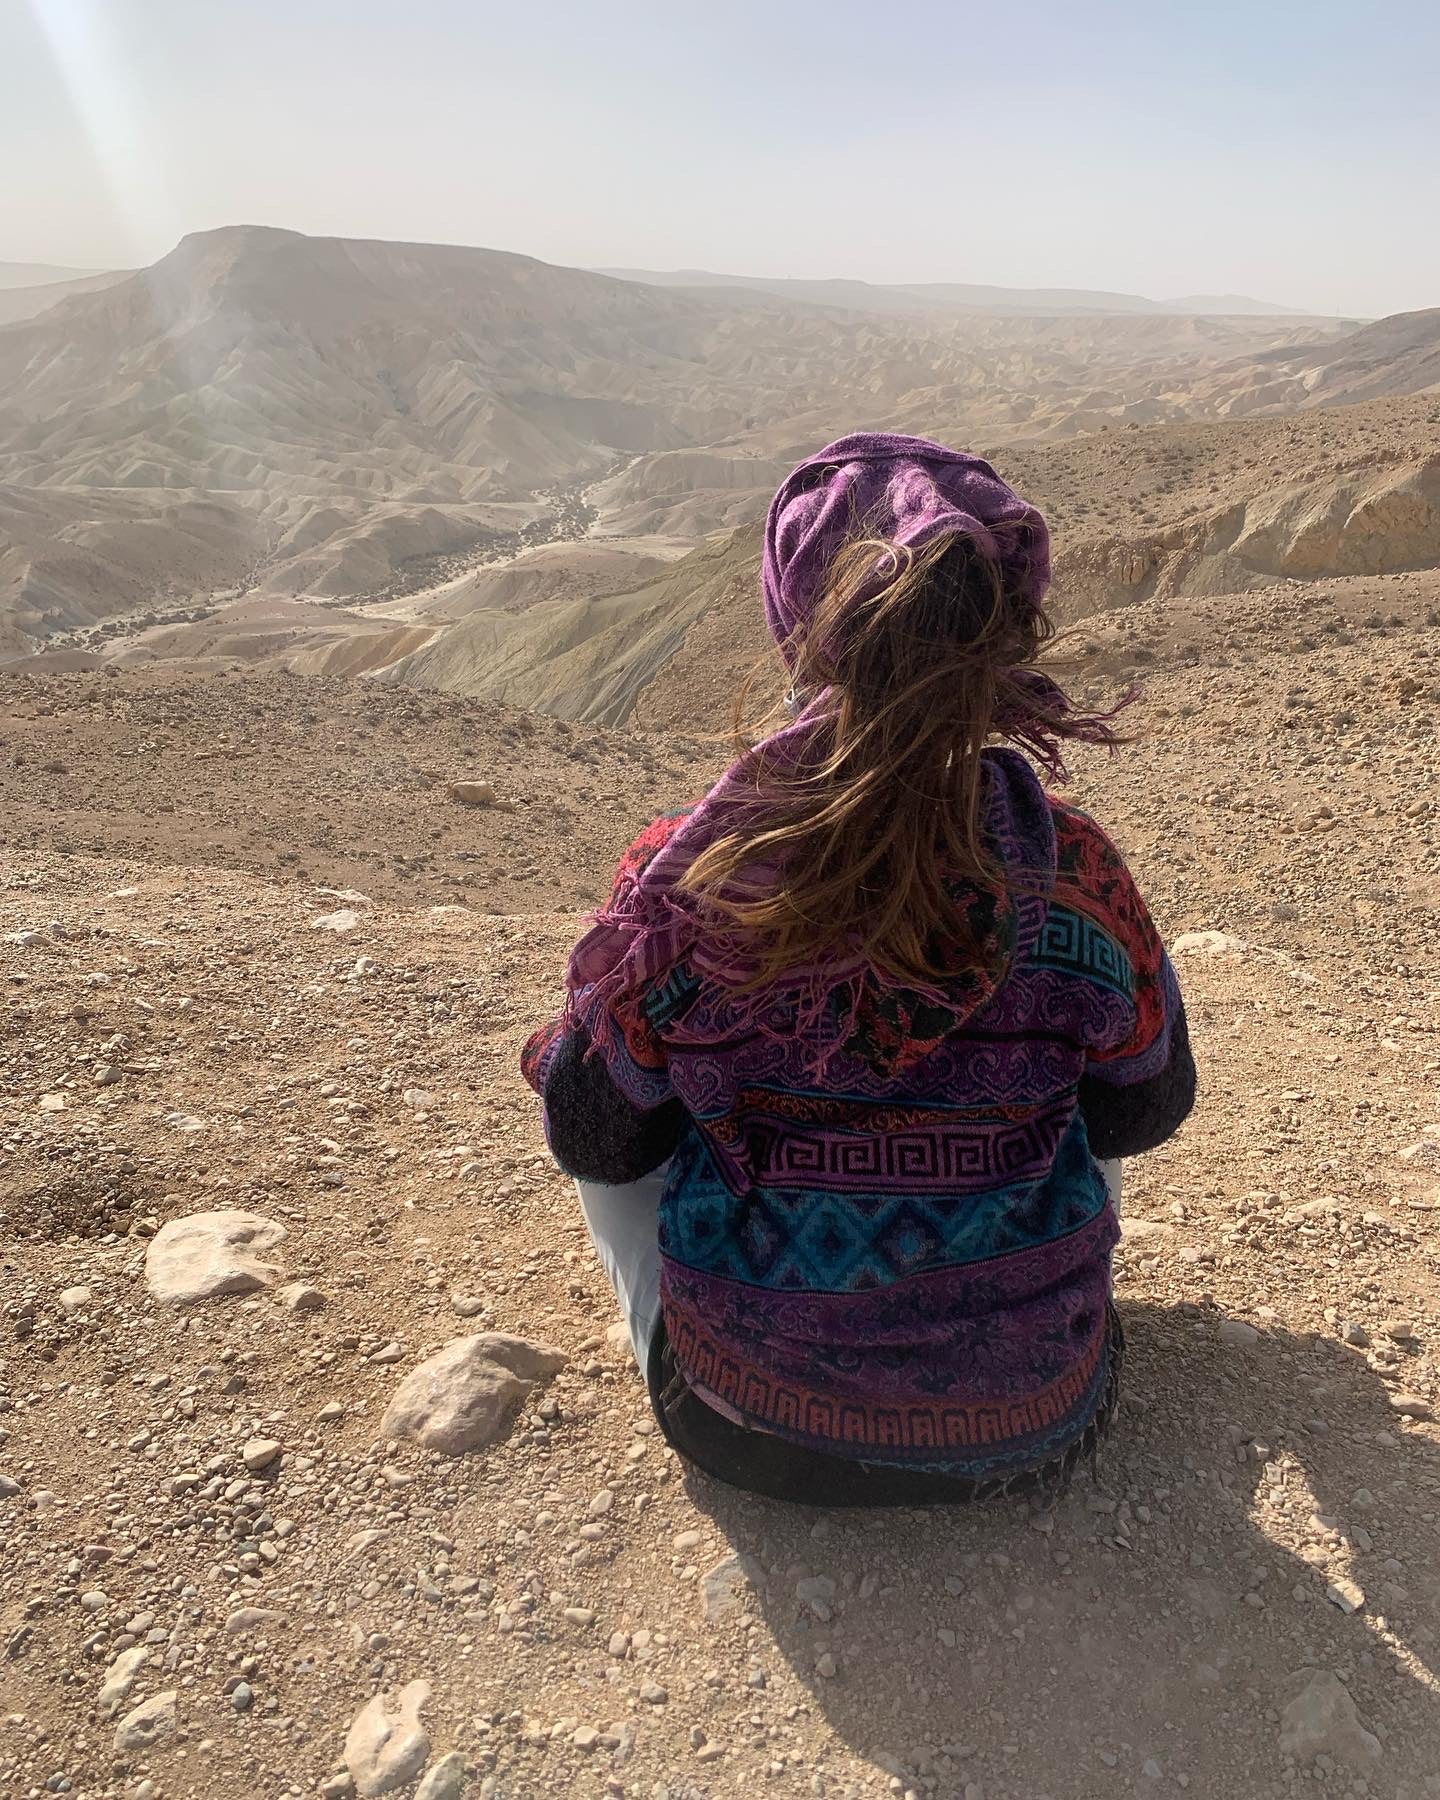 Avigail Sapir, Ketubah Artist, sitting and looking out into the mountains